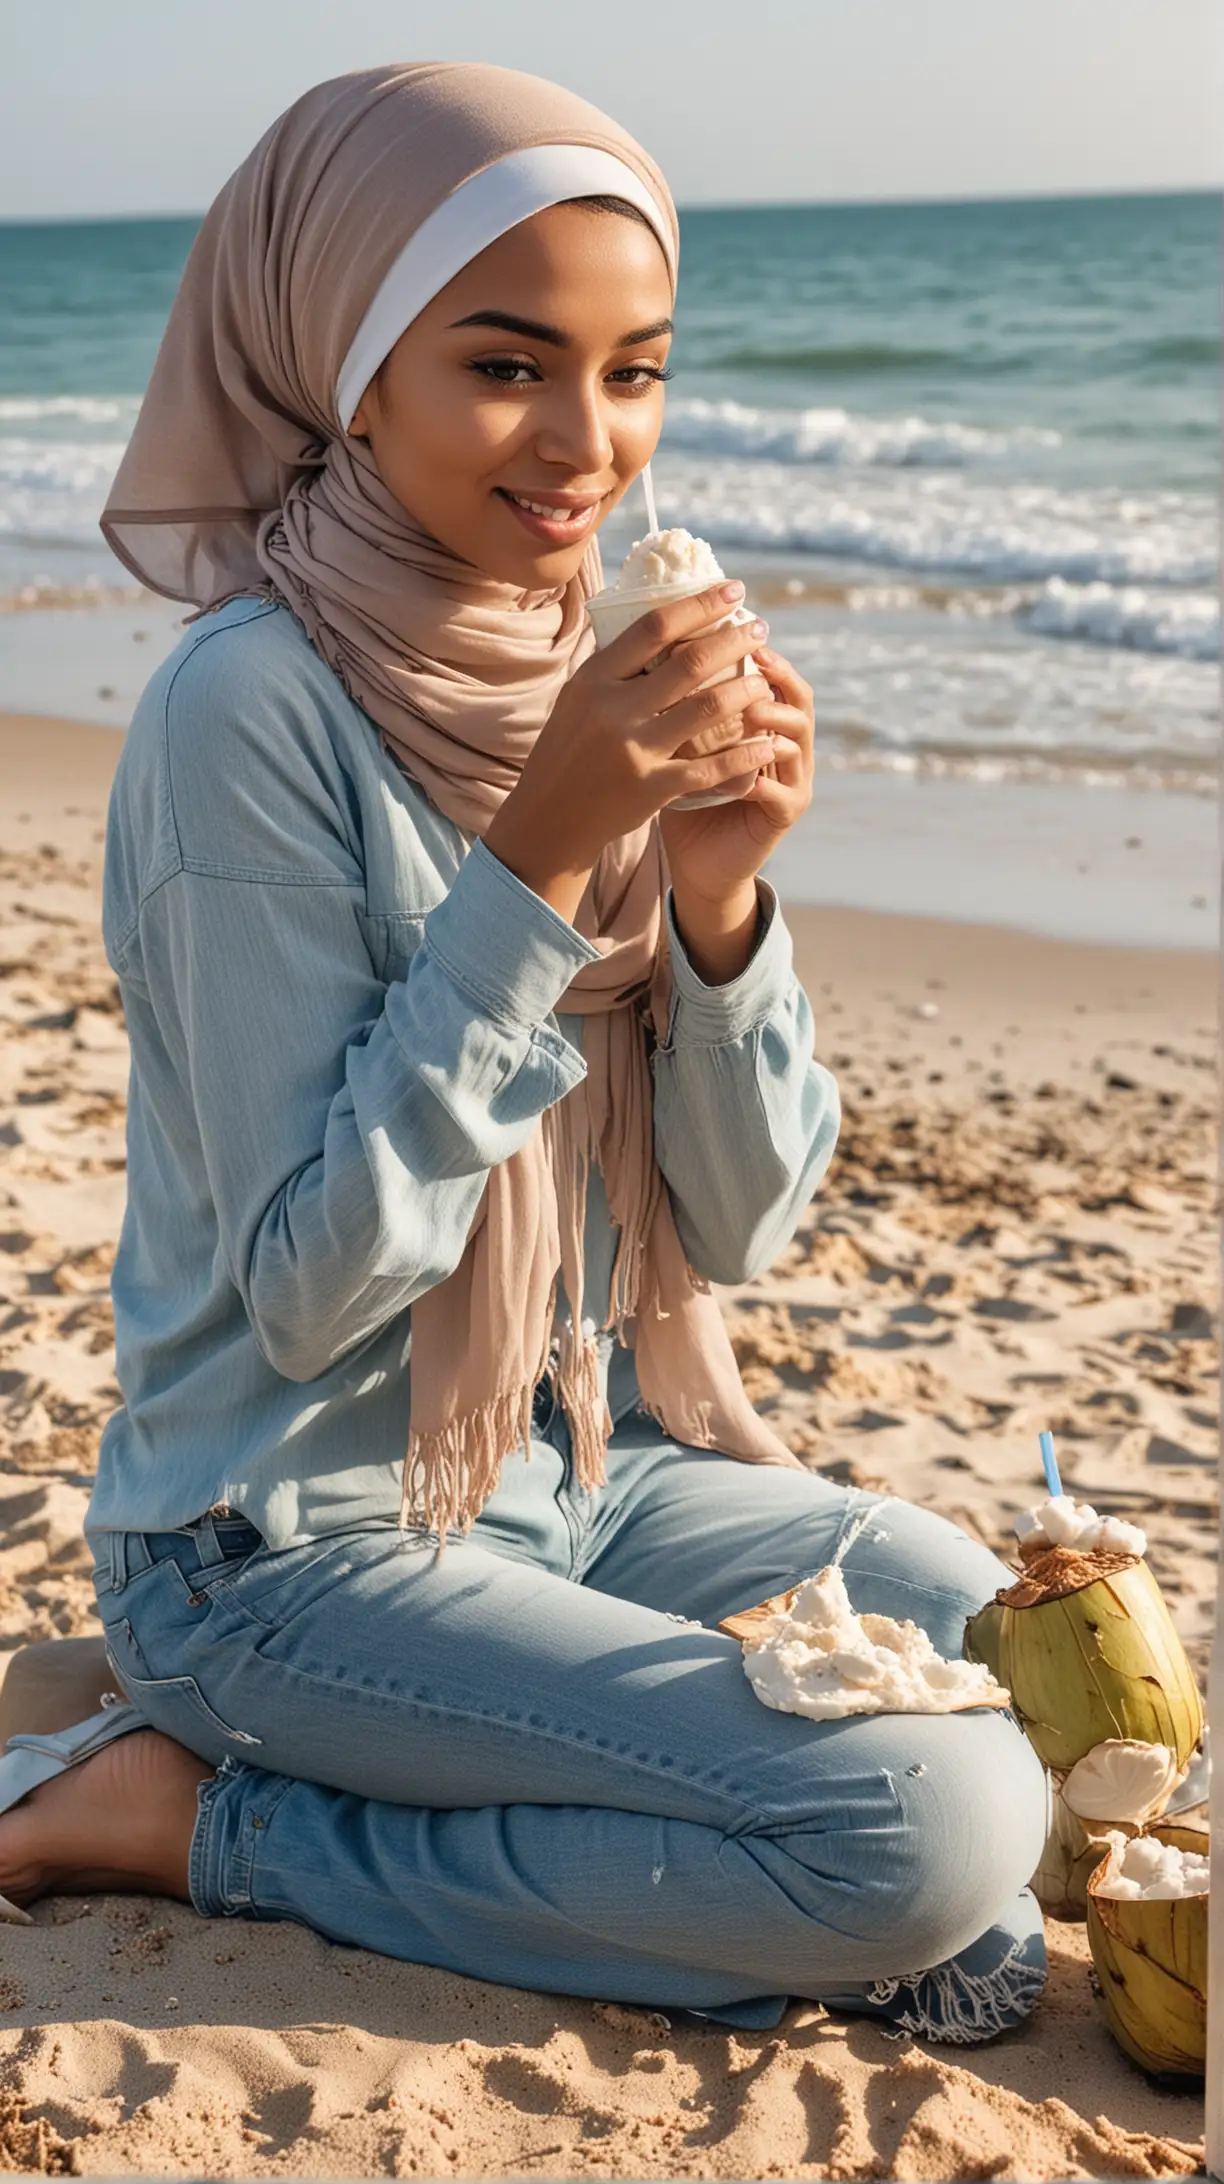 Muslim Woman Relaxing at Beach with Coconut Ice Drink